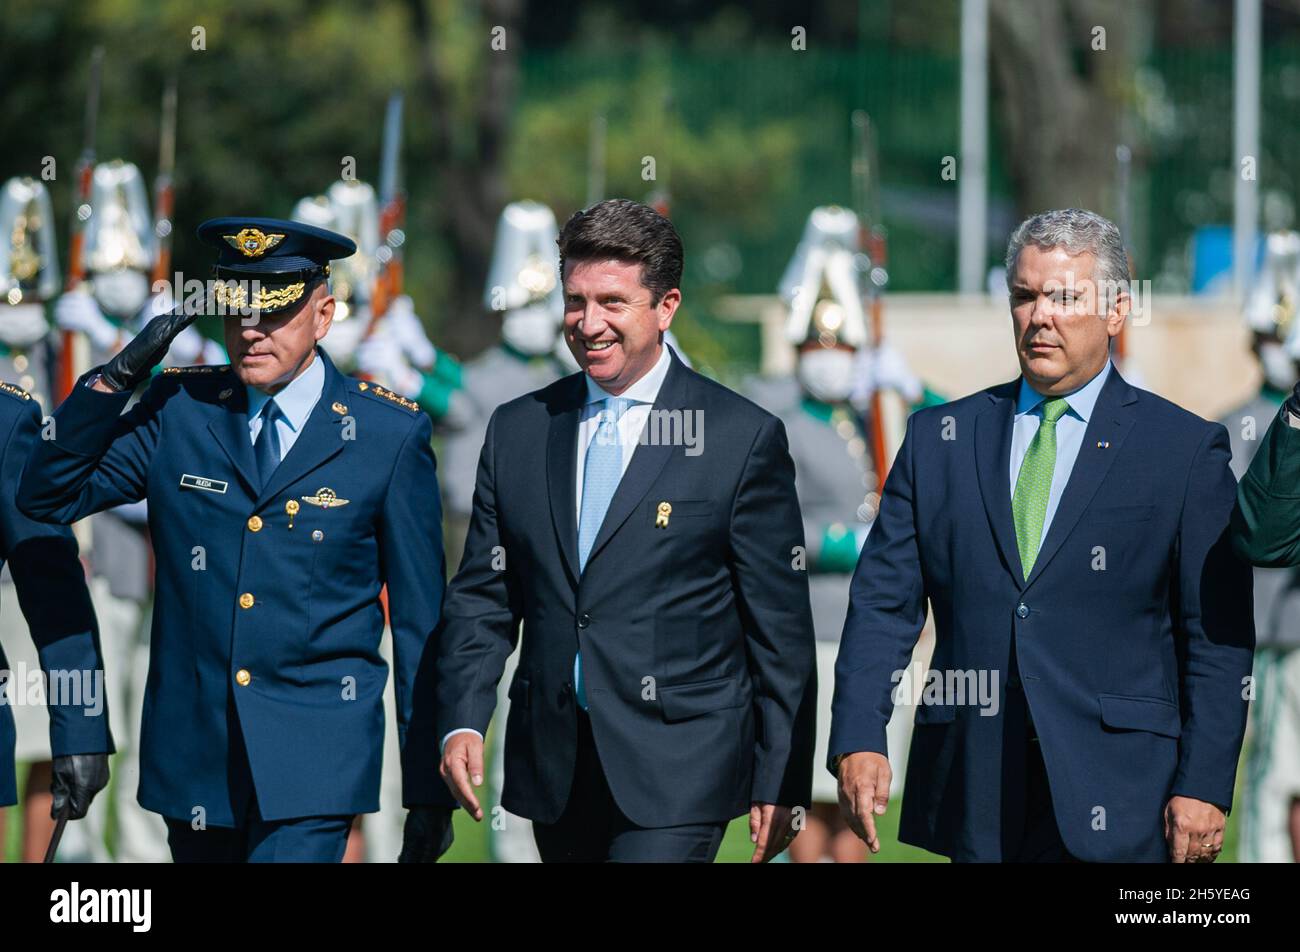 Bogota, Colombia. 11th Nov, 2021. Minister of Defense Diego Molano (Left) and President of Colombia Ivan Duque Marquez (Right) during an event were Colombia's president Ivan Duque Marquez and Colombia's Minister of Defense Diego Molano in conmmemoration of the 130 anniversary of Colombia's National Police and the promotion to officers to more than a 100 police members, in Bogota, Colombia on November 11, 2021. Credit: Long Visual Press/Alamy Live News Stock Photo